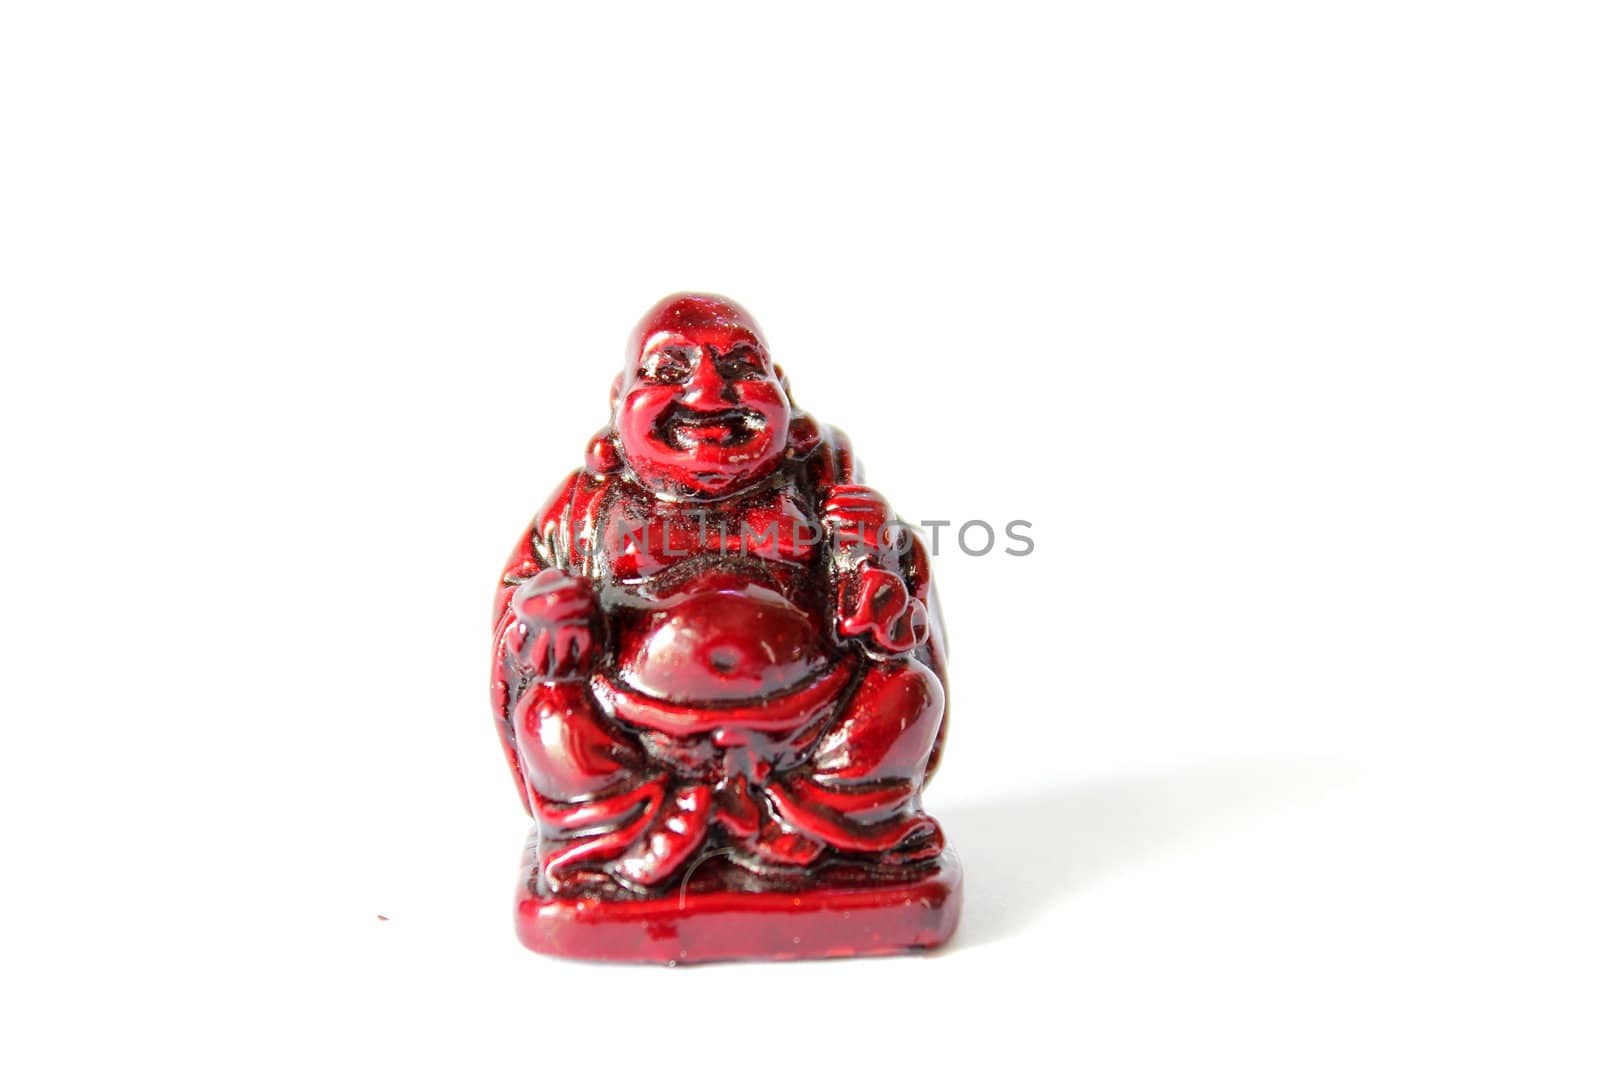 Isolated wooden Buddha statue